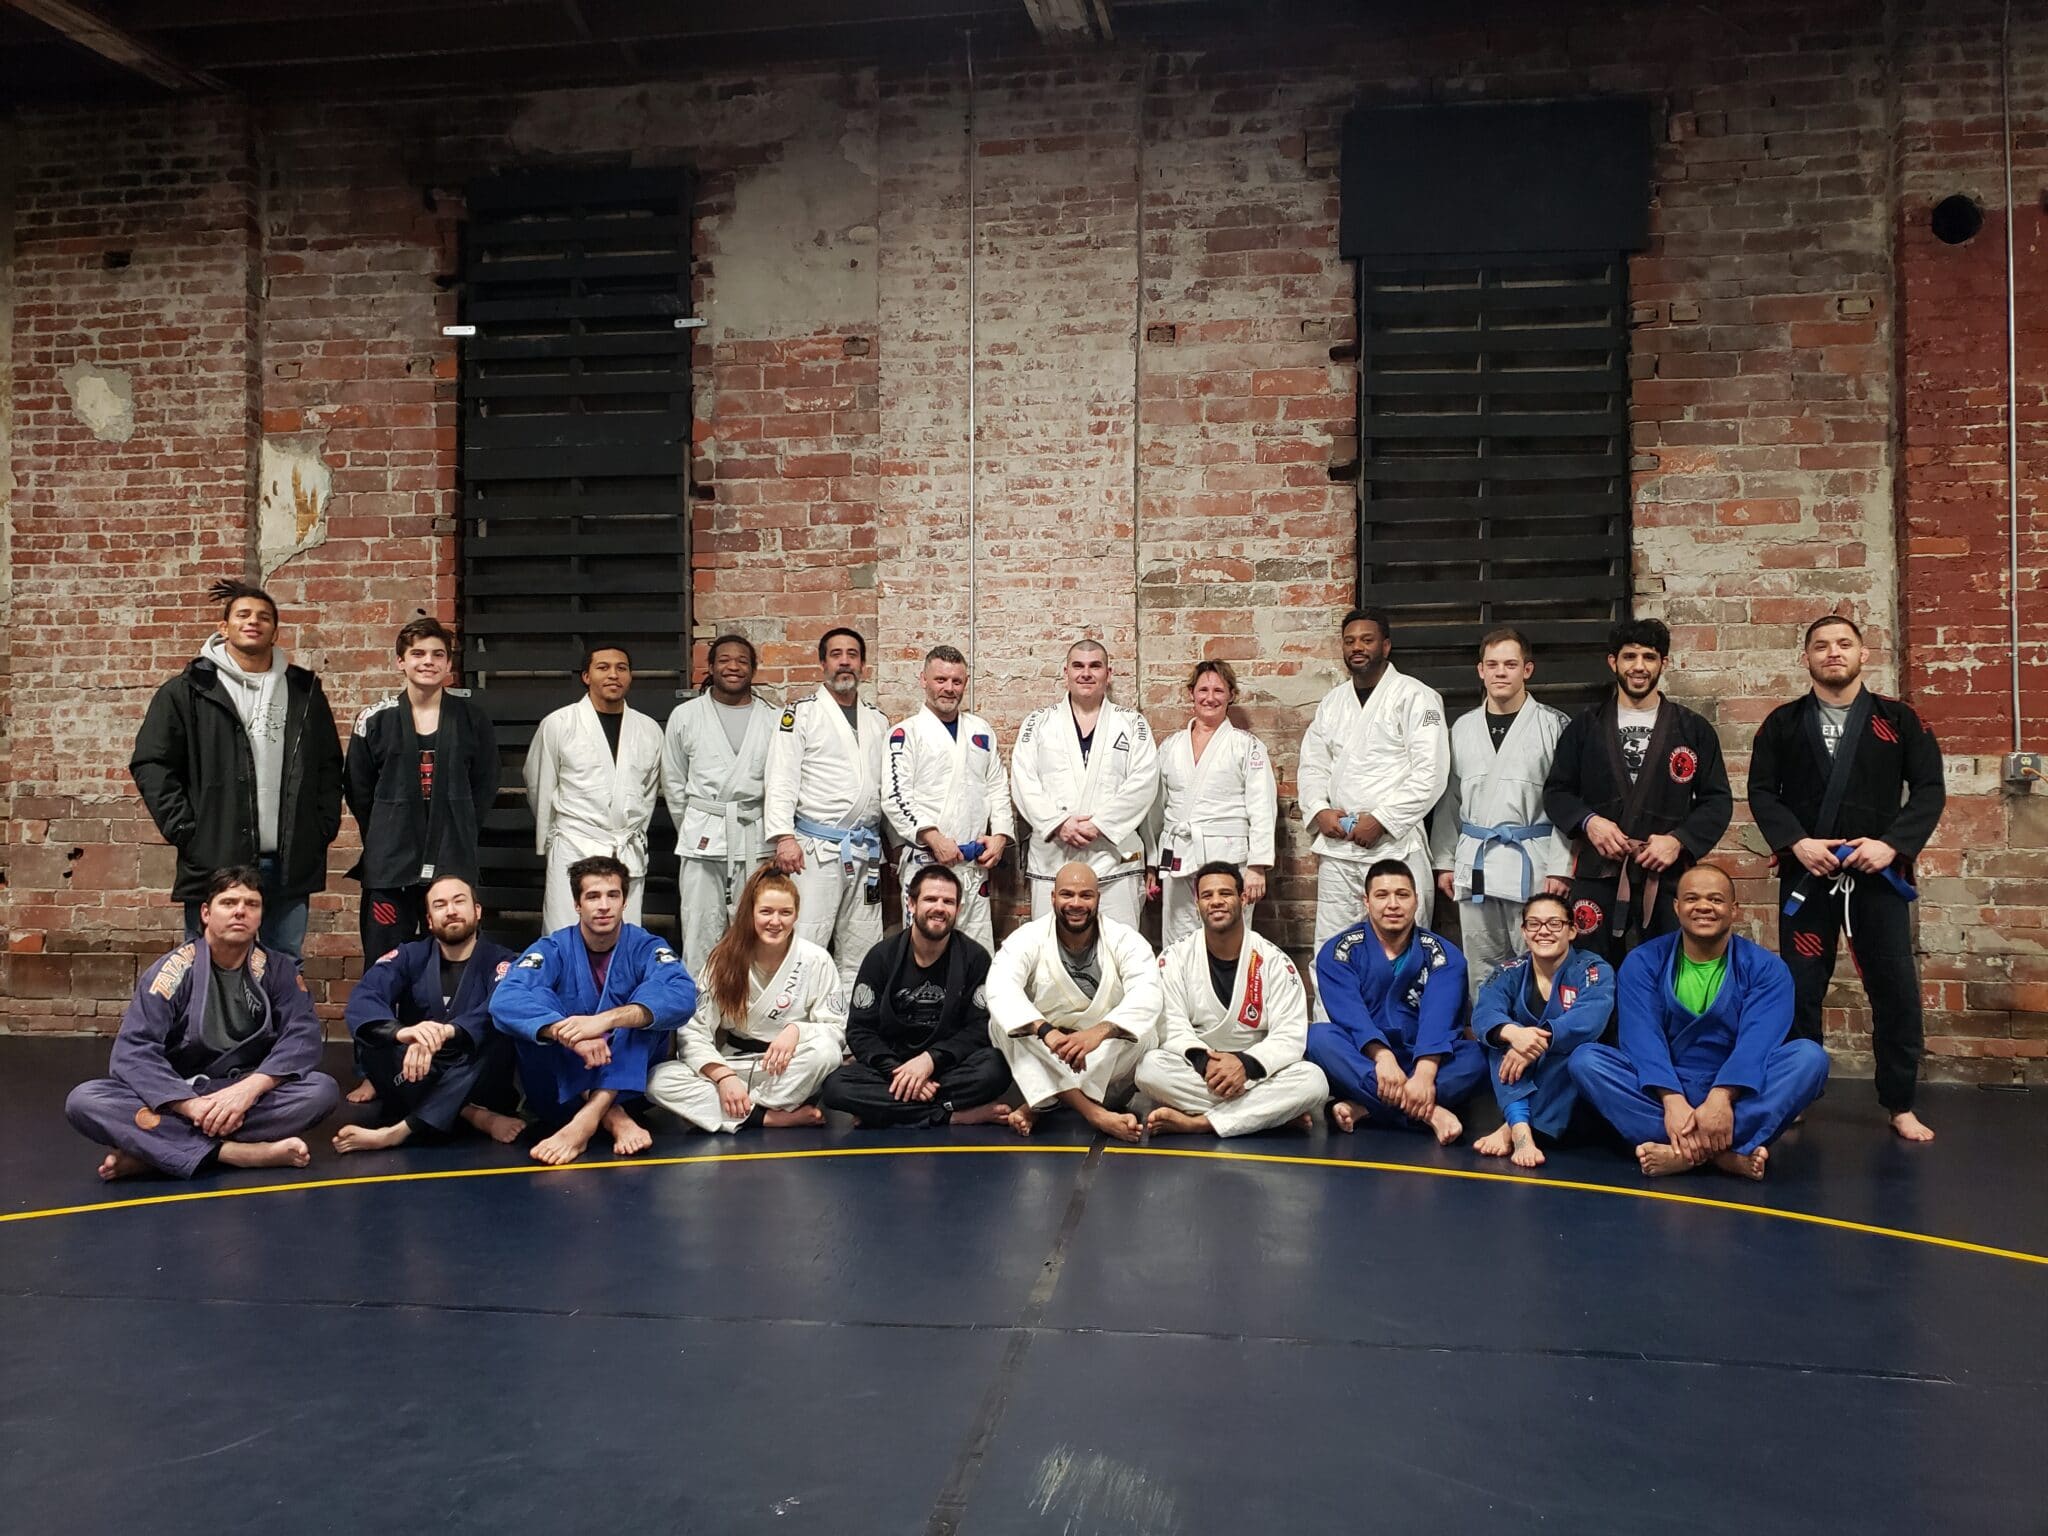 Functions of BJJ Adults Warrior Challenge